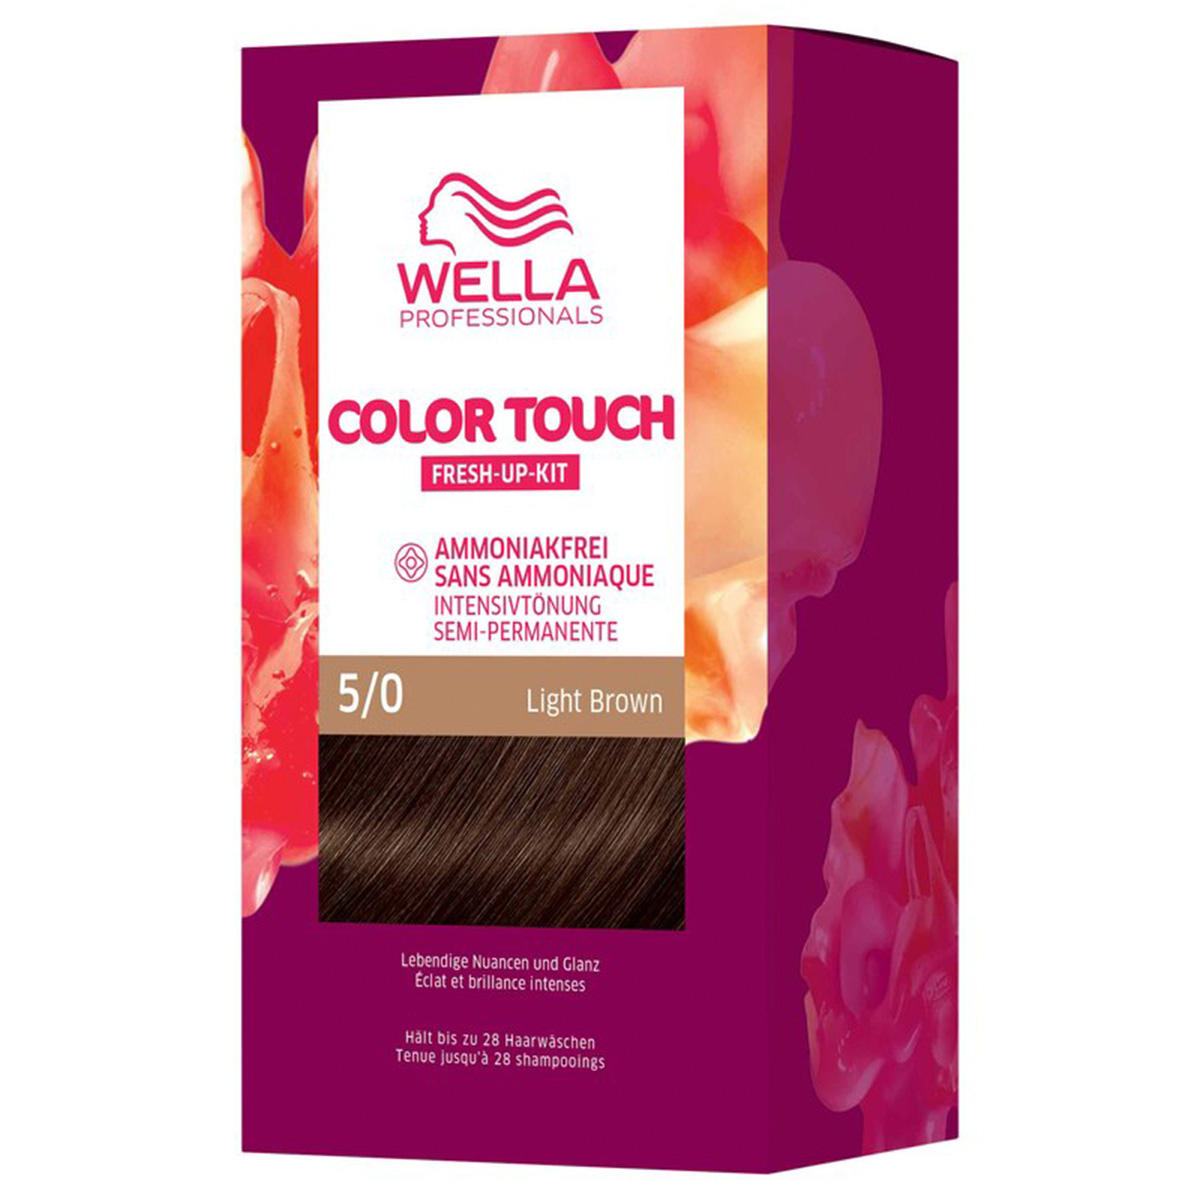 Wella Color Touch Fresh-Up-Kit 5/0 Lichtbruin 130 ml - 1